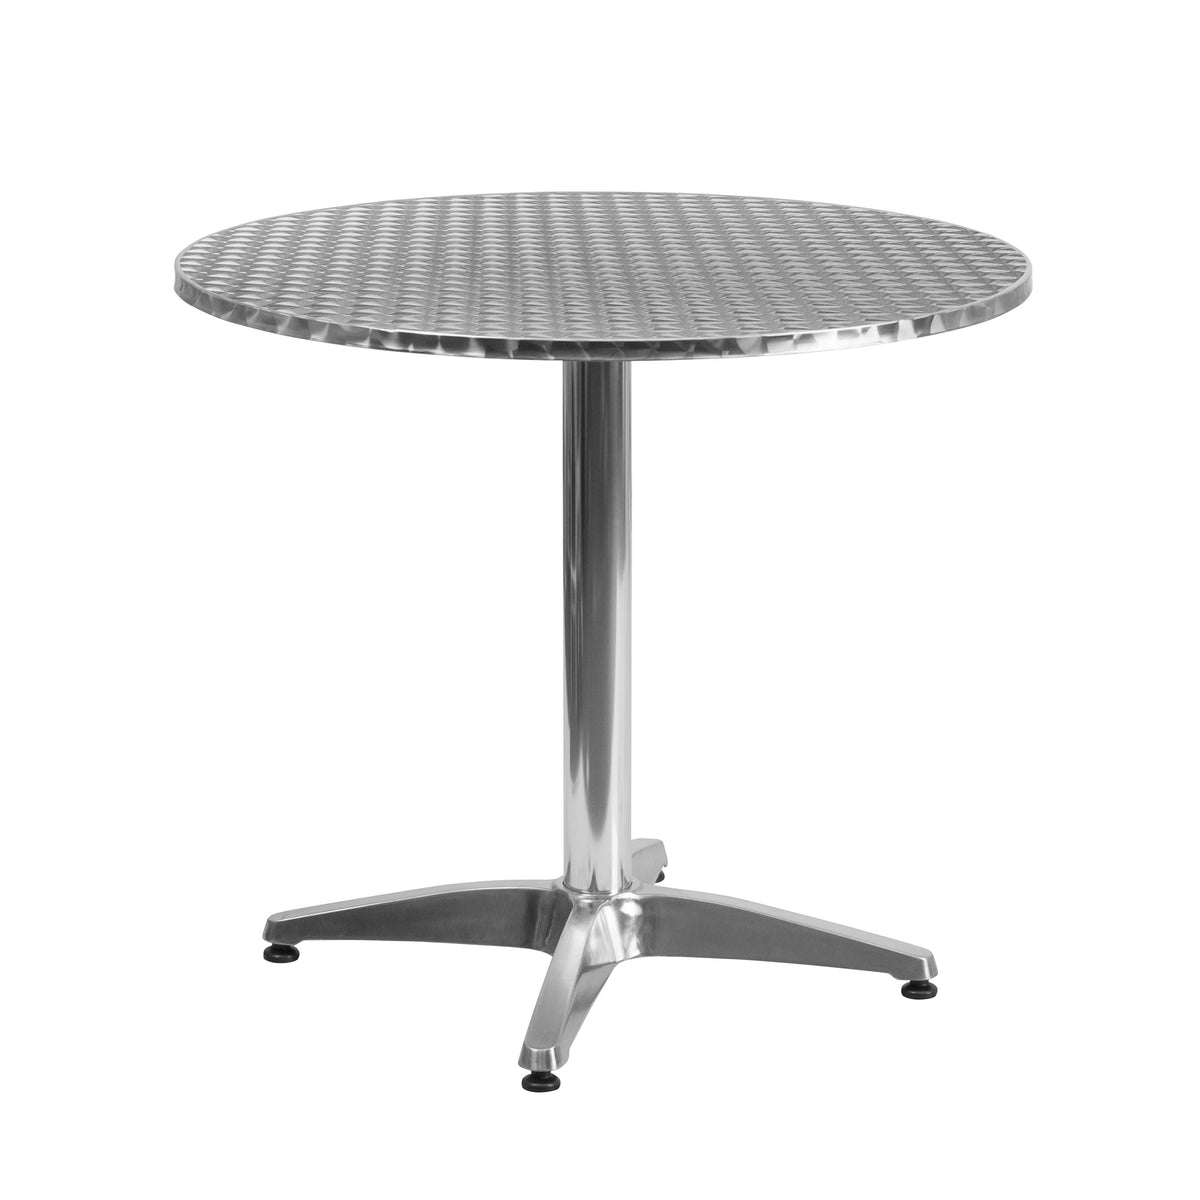 Aluminum |#| 31.5inch Round Aluminum Smooth Top Indoor-Outdoor Table with Base